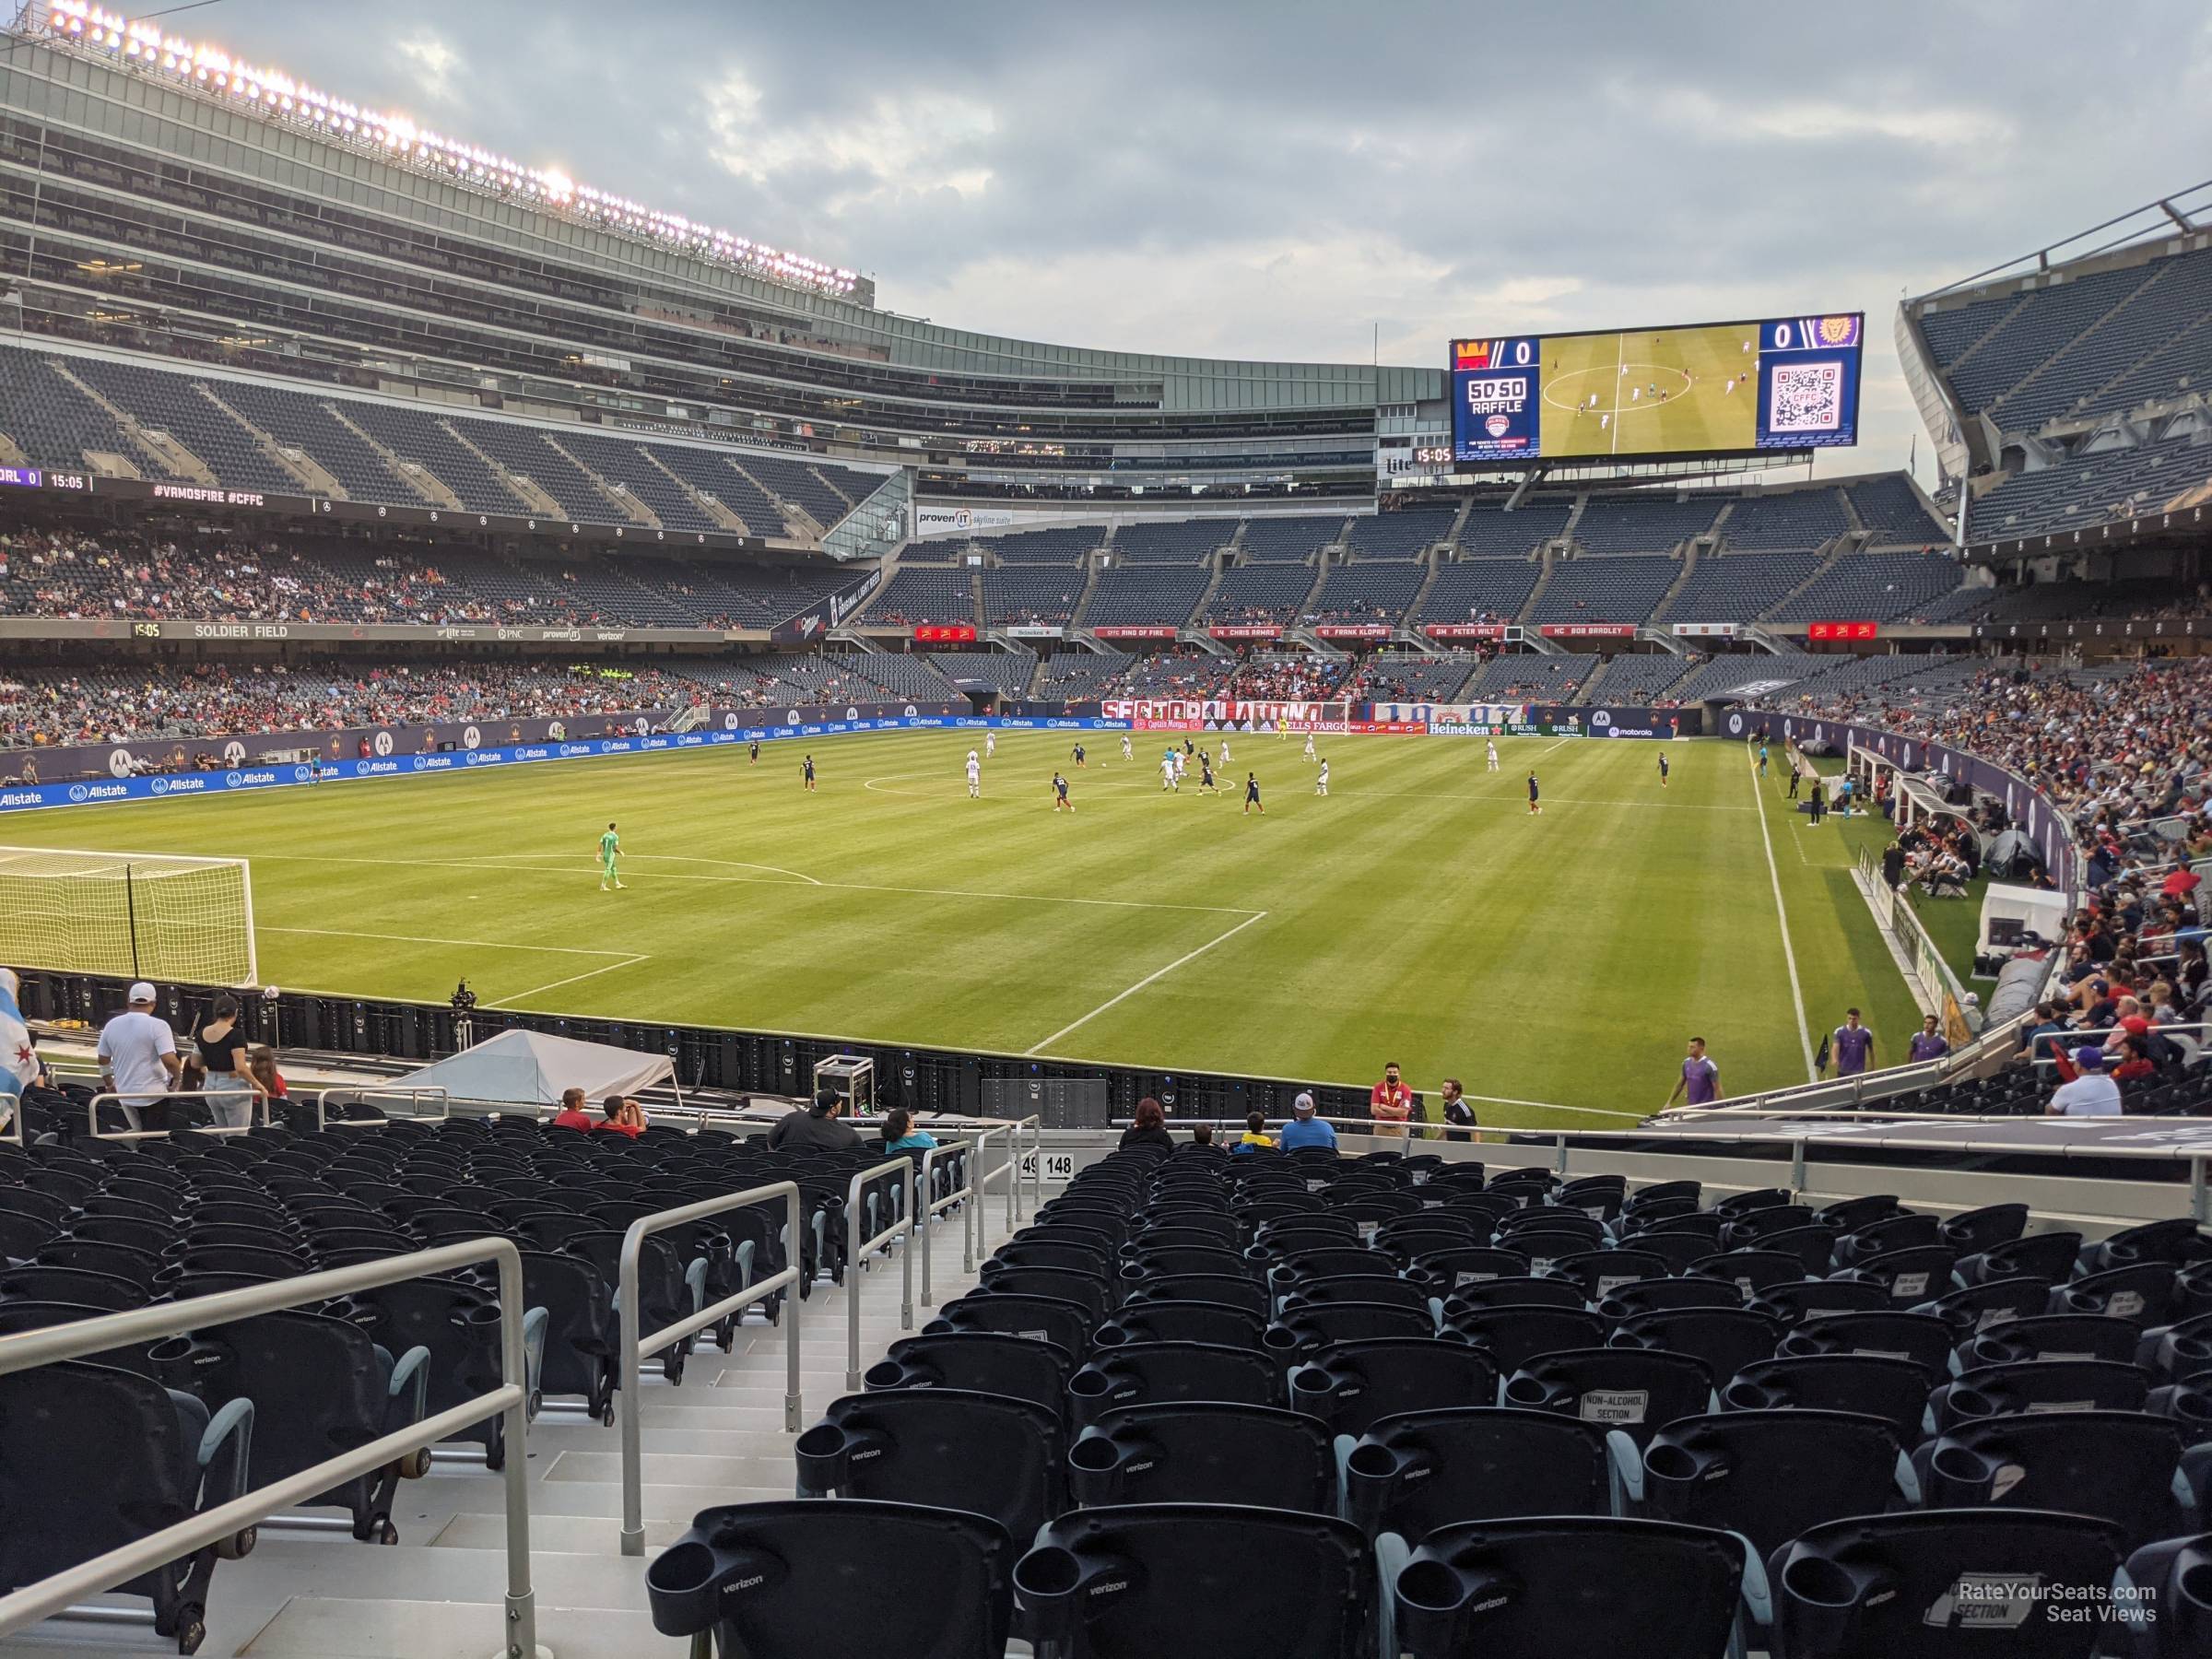 section 148, row 18 seat view  for soccer - soldier field